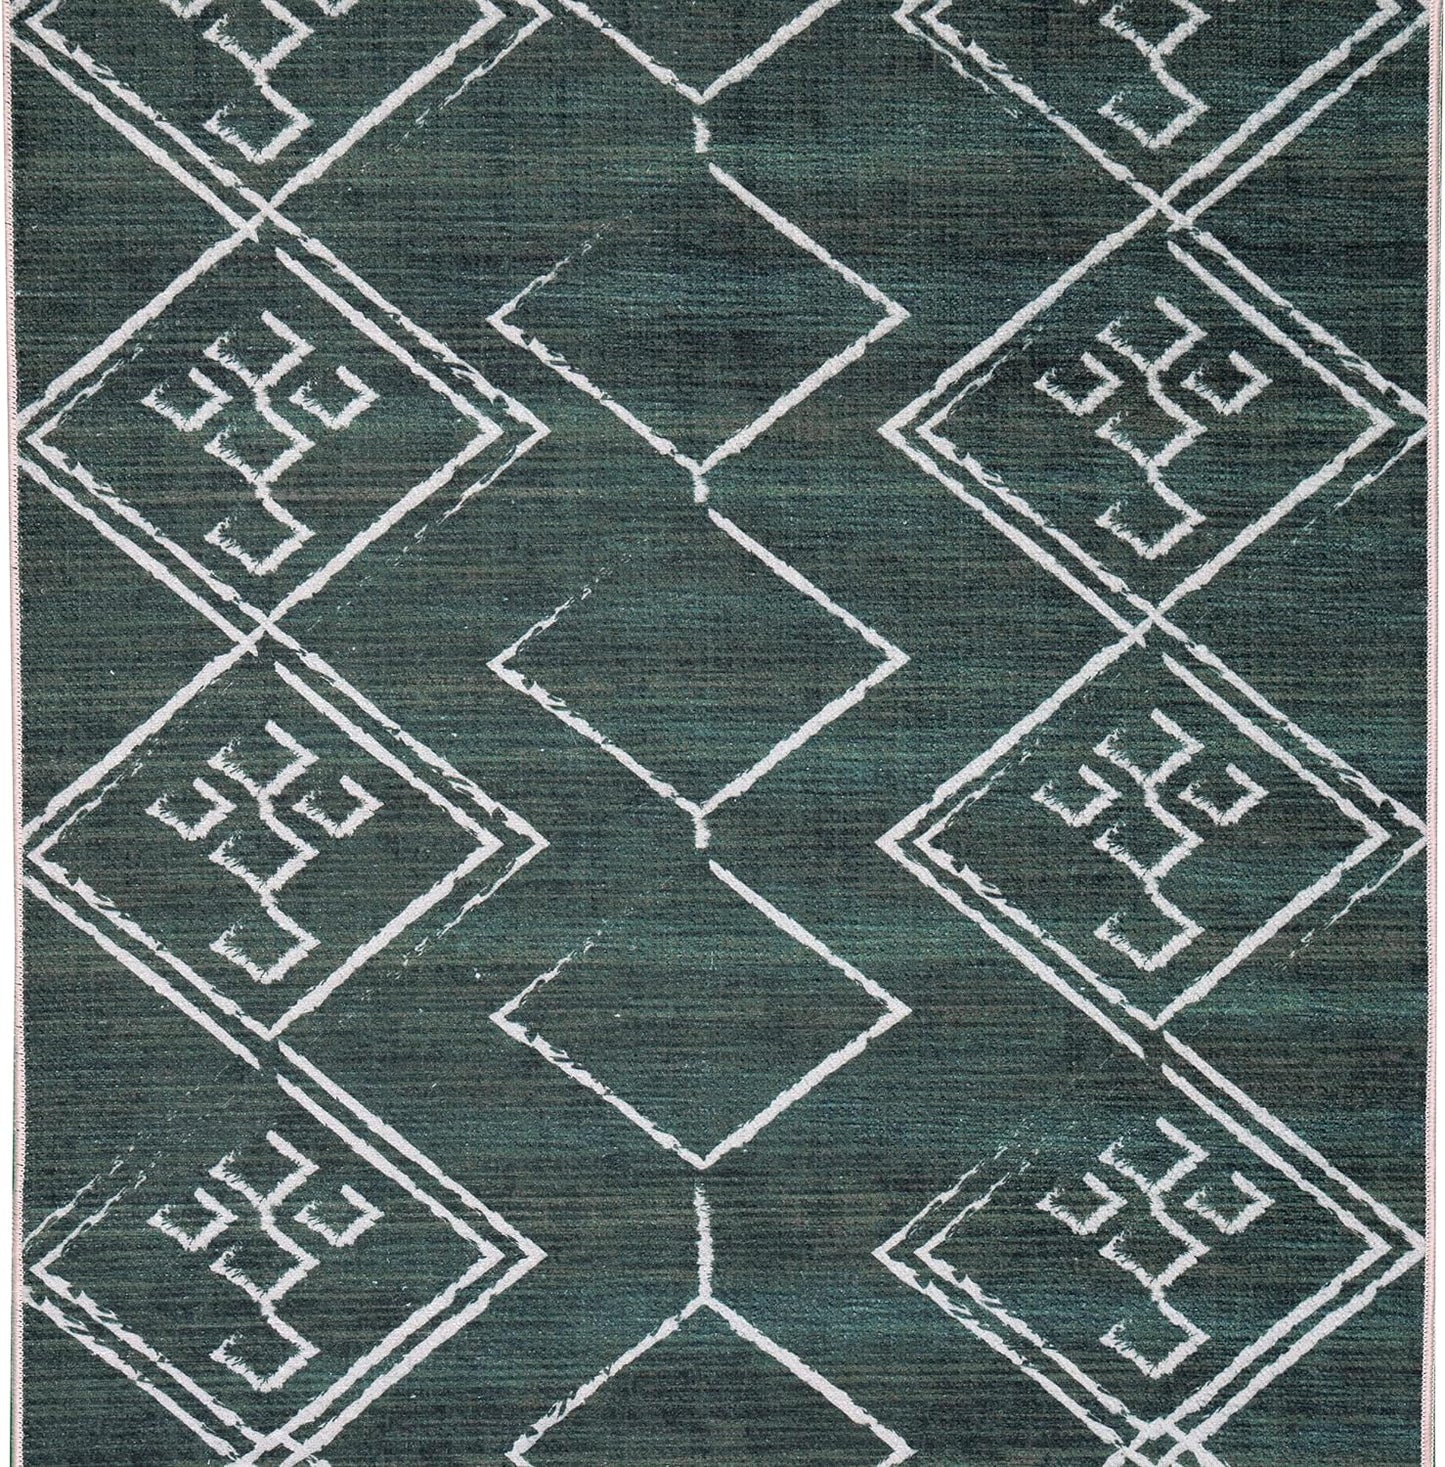 Playa Rug Machine Washable Area Rug With Non Slip Backing - Stain Resistant - Eco Friendly - Family and Pet Friendly - Aspen Tribal Moroccan Bohemian Green&Creme Design